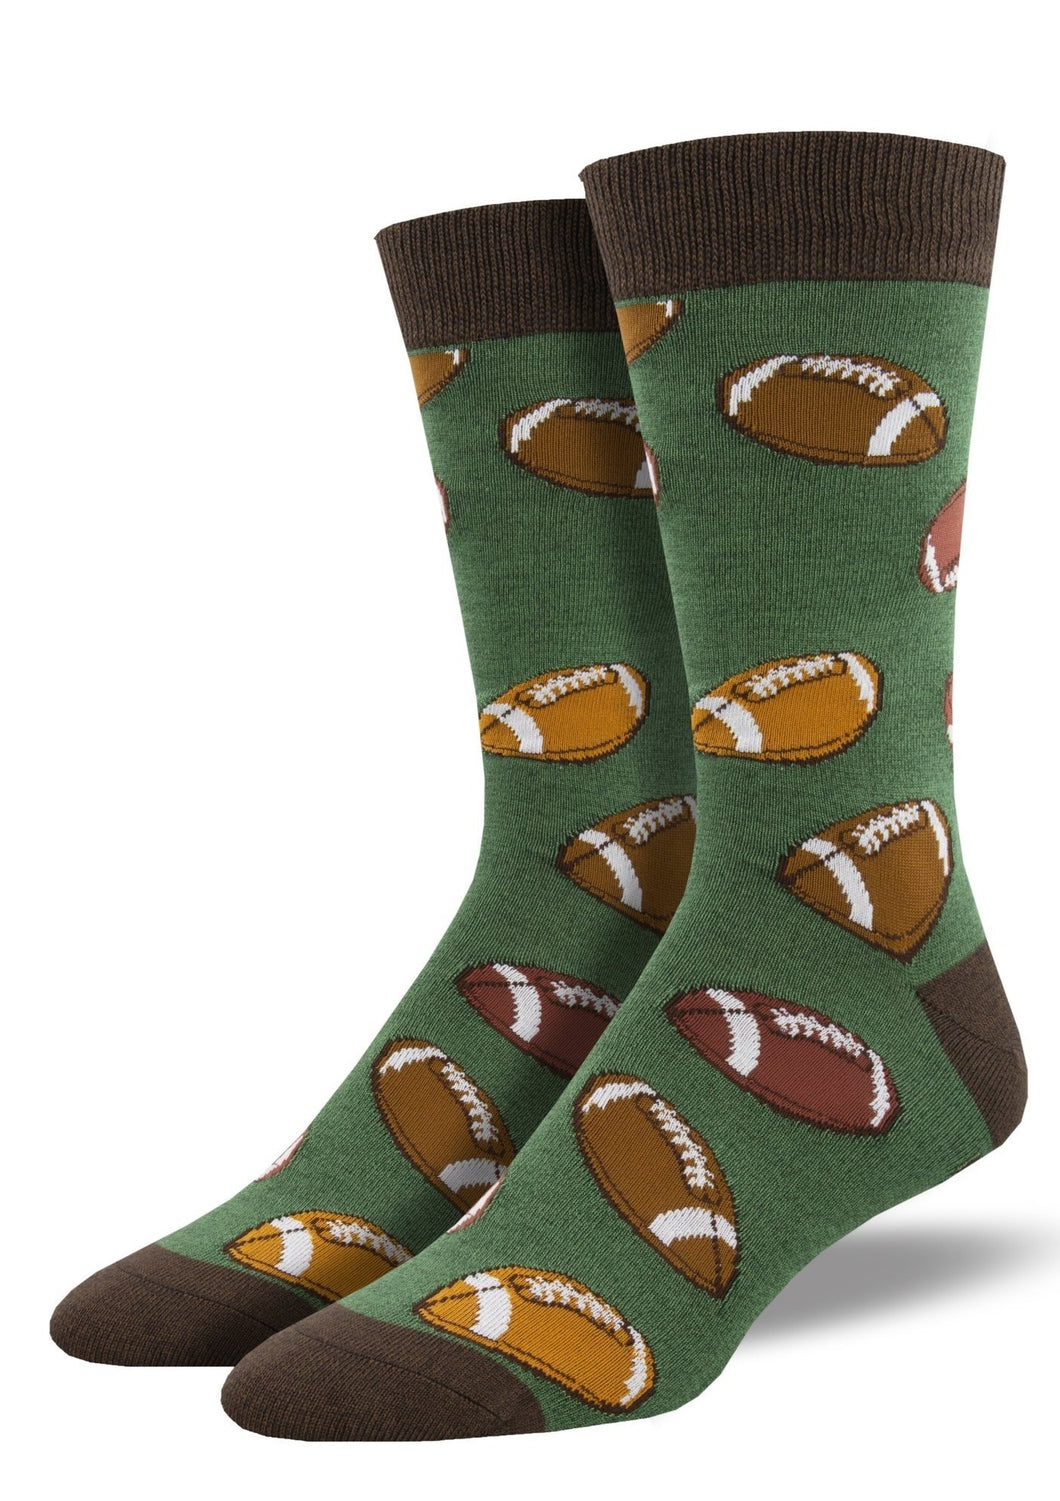 Green with Footballs.  Soft, Breathable, Moisture Wicking, Antibacterial, Hypoallergenic, Amazing Socks! One Size Fits Most (Men's 7-13) Fabrication: 66% Rayon from Bamboo, 32% Nylon, 2% Spandex SockSmith $22.00